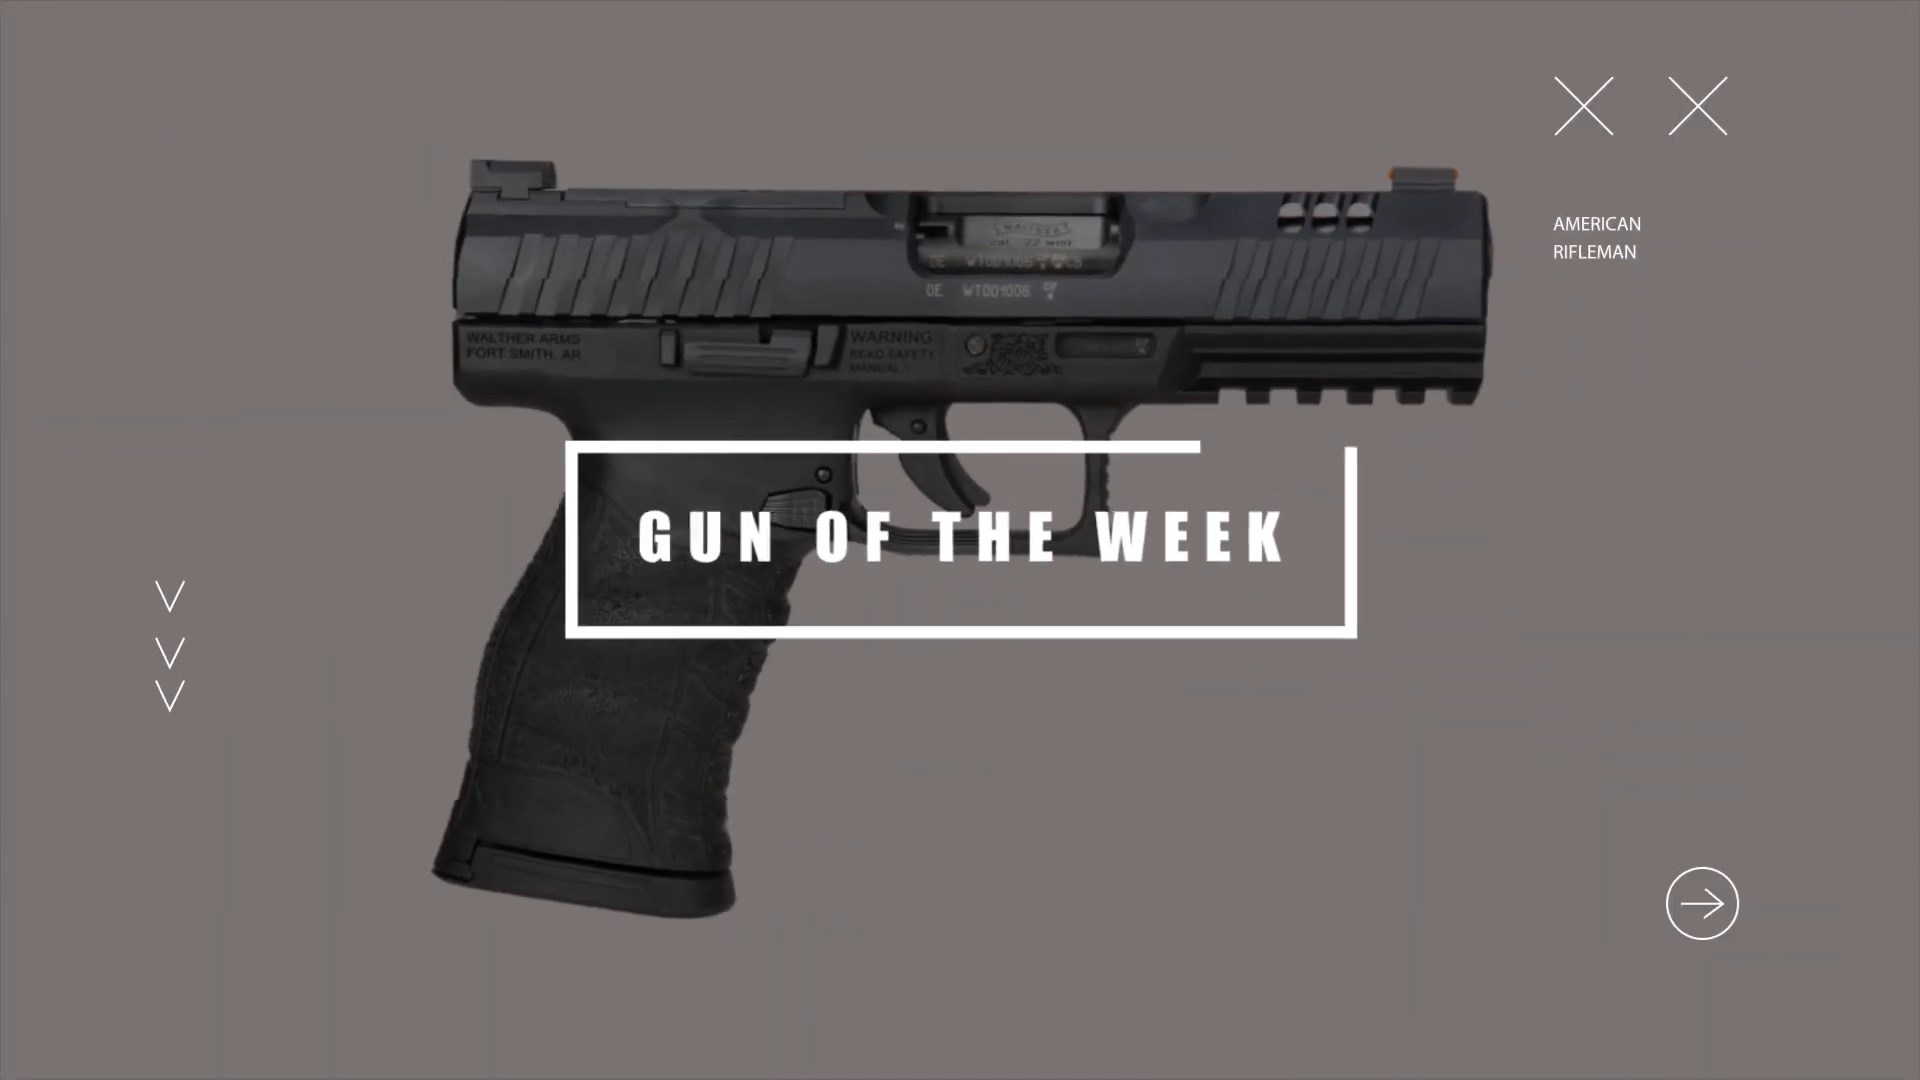 Walther Arms WMP .22 WMR pistol right side on white with text on image noting GUN OF THE WEEK AMERICAN RIFLEMAN